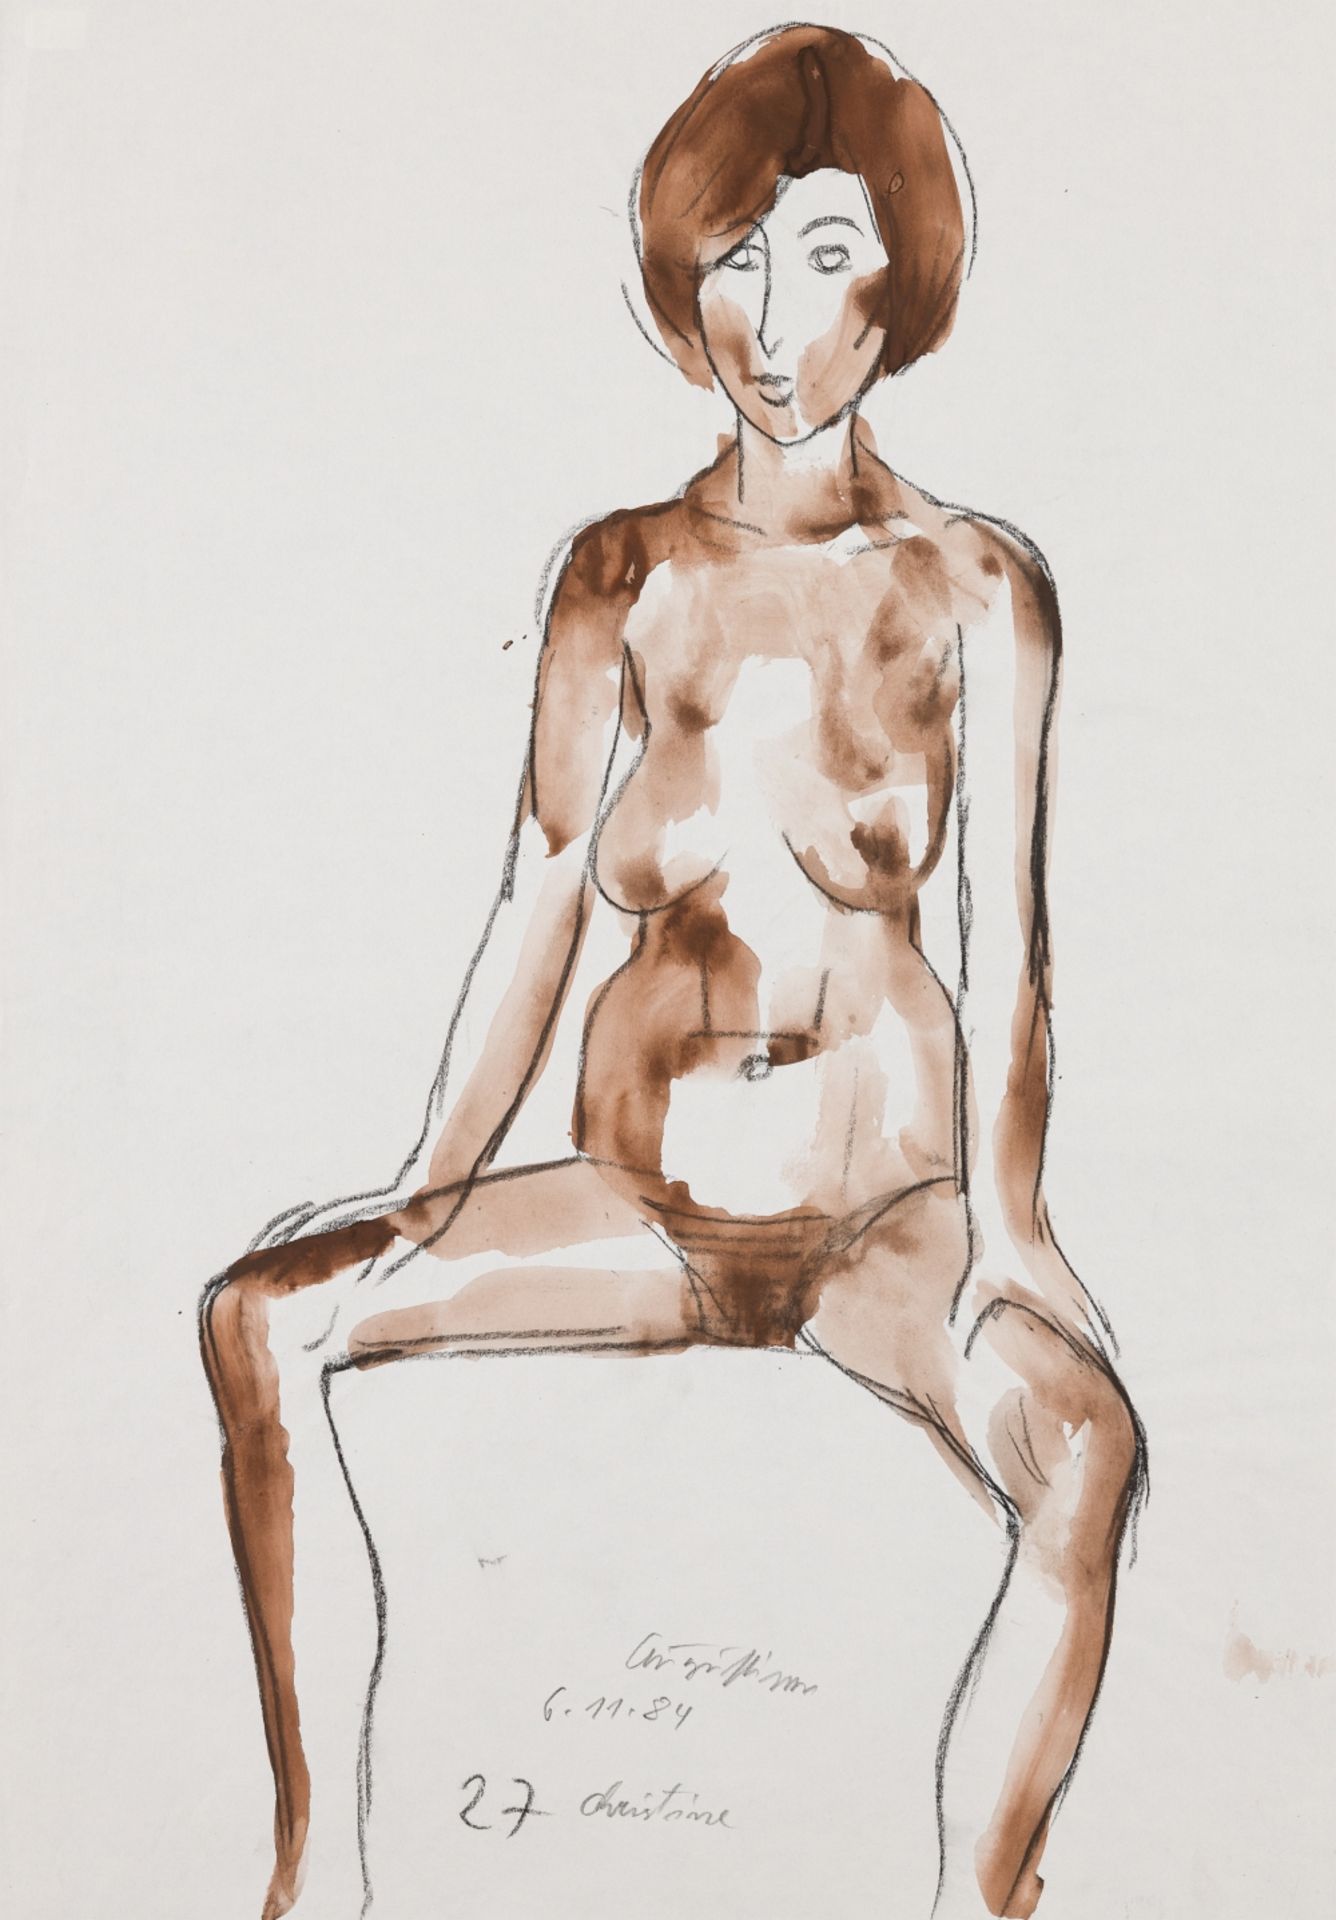 Augustiner, Werner(1922-1986)Christine, 6.11.1984charcoal and watercolour on papersigned, dated